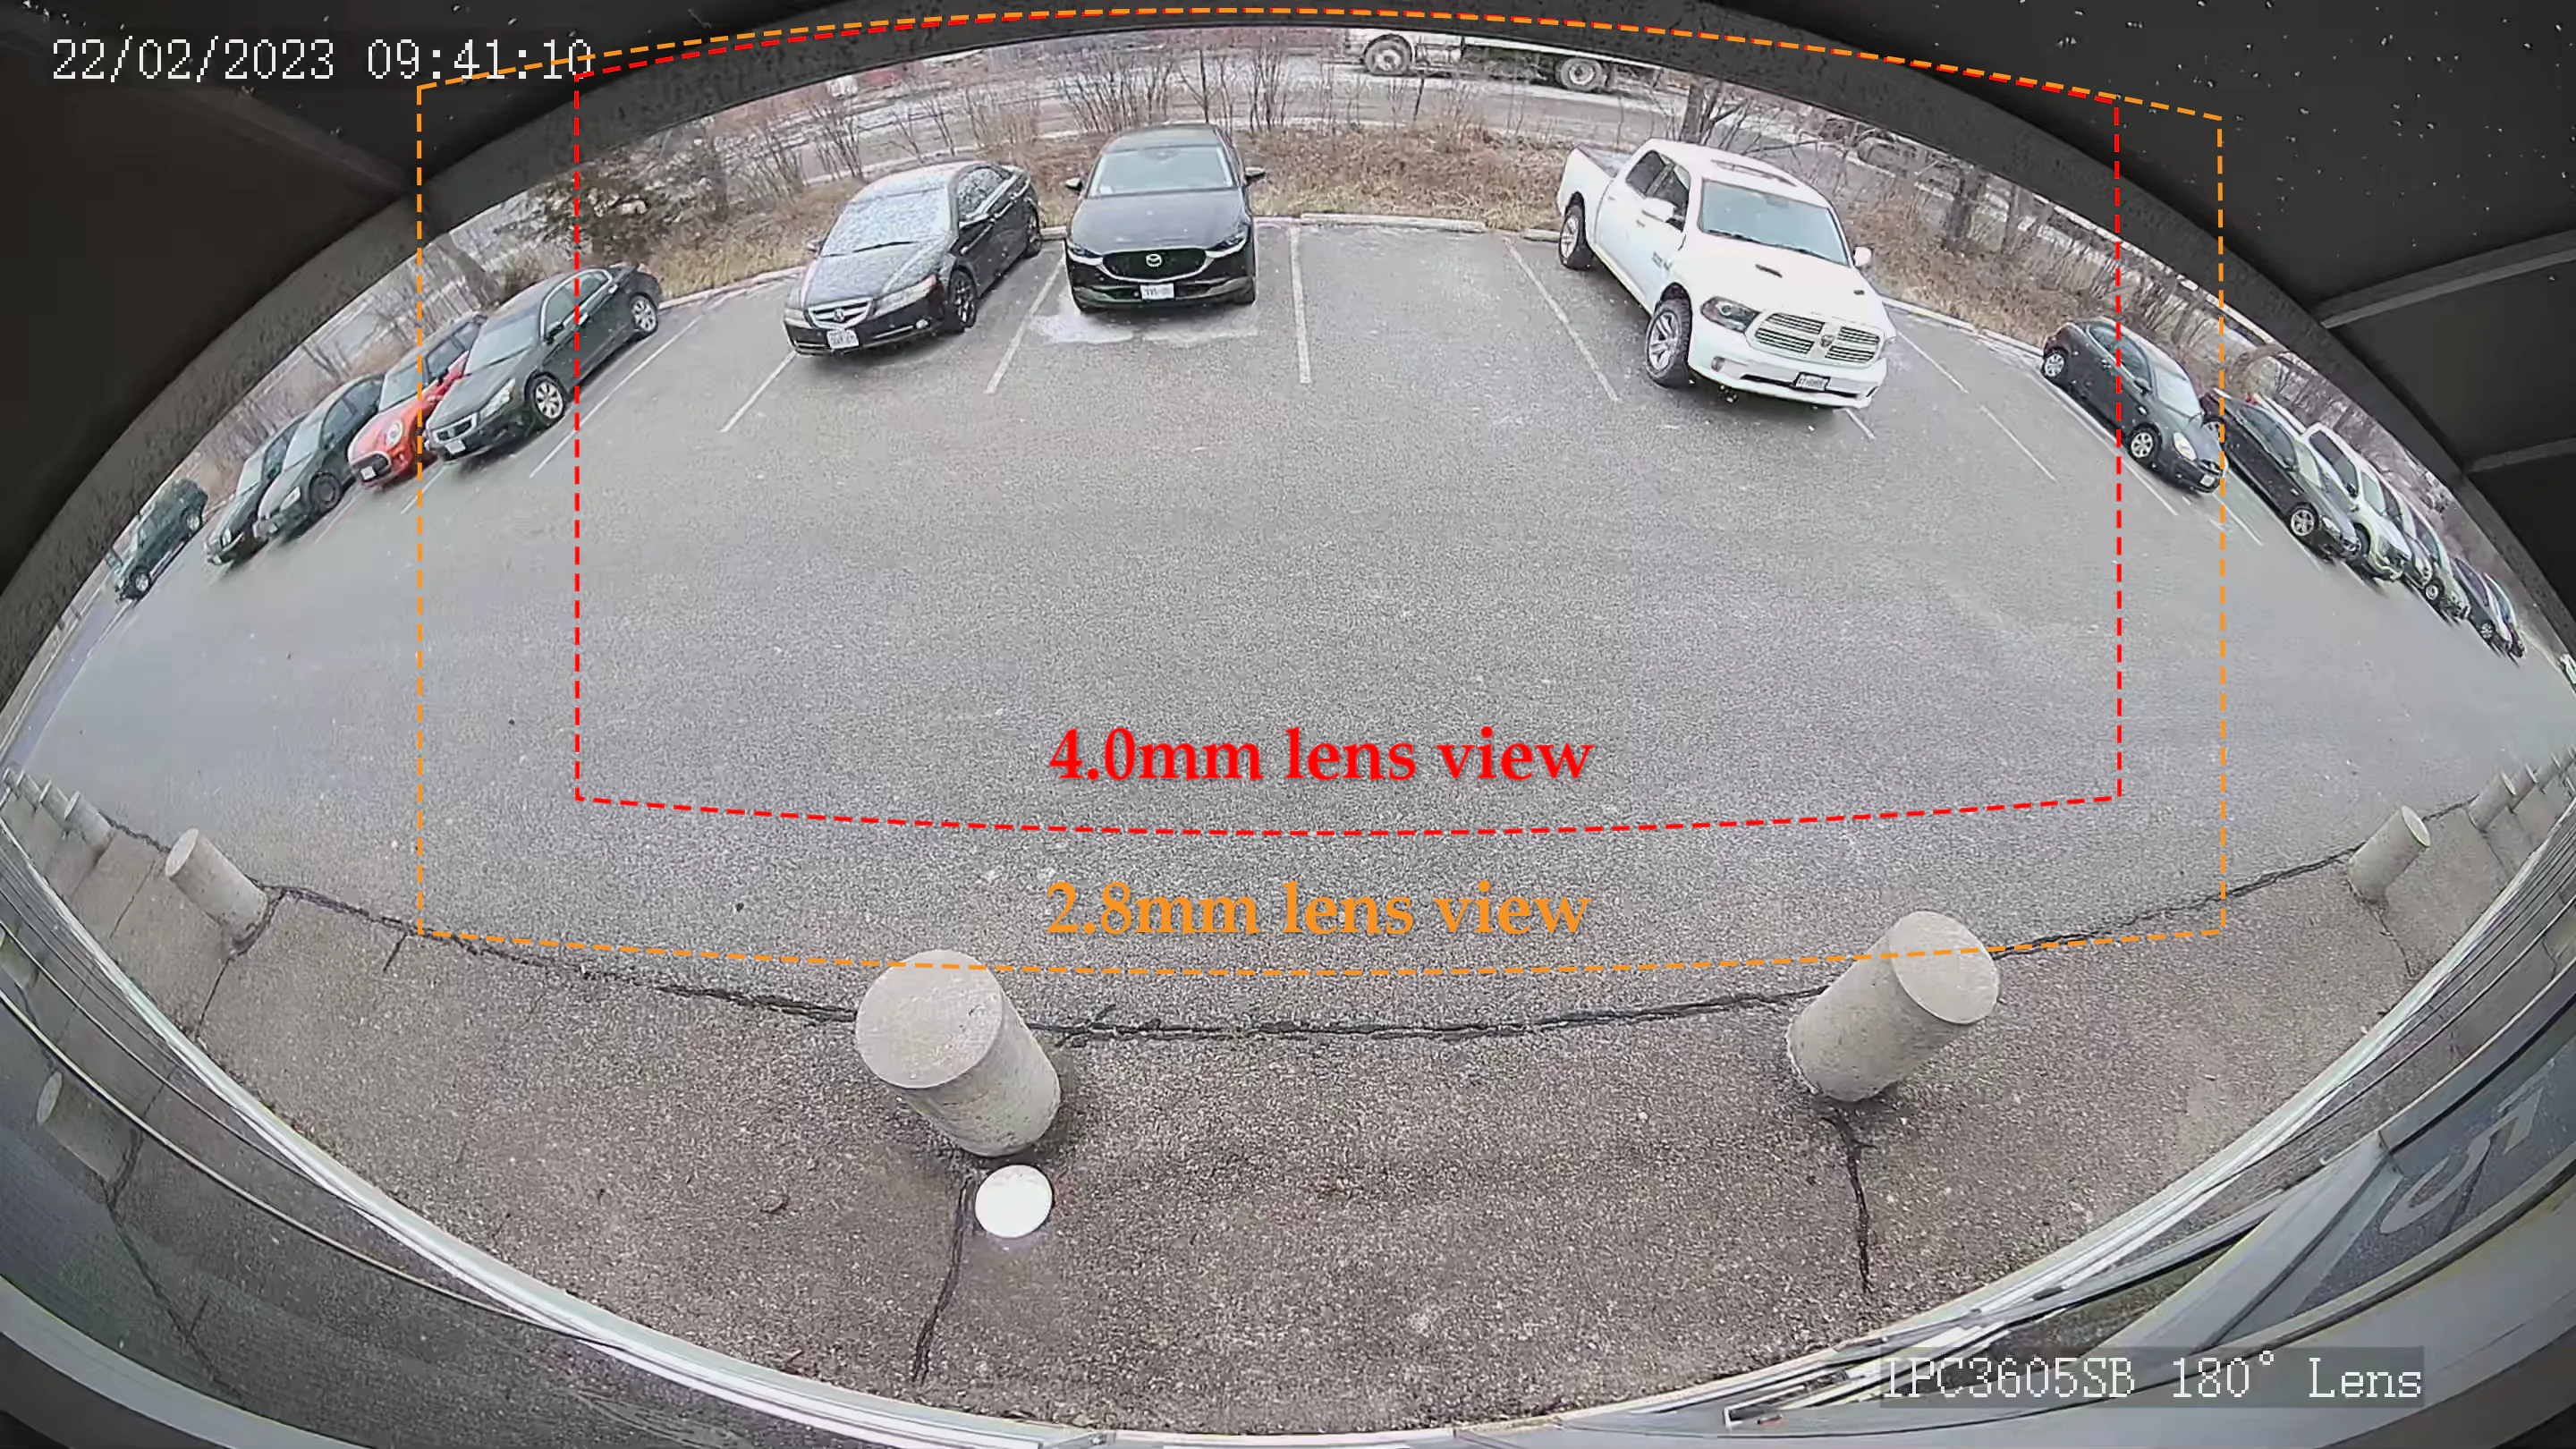 Uniview 180° camera snapshot of a parking lot, with overlay showing 2.8mm and 4.0mm lens views which are comparatively smaller